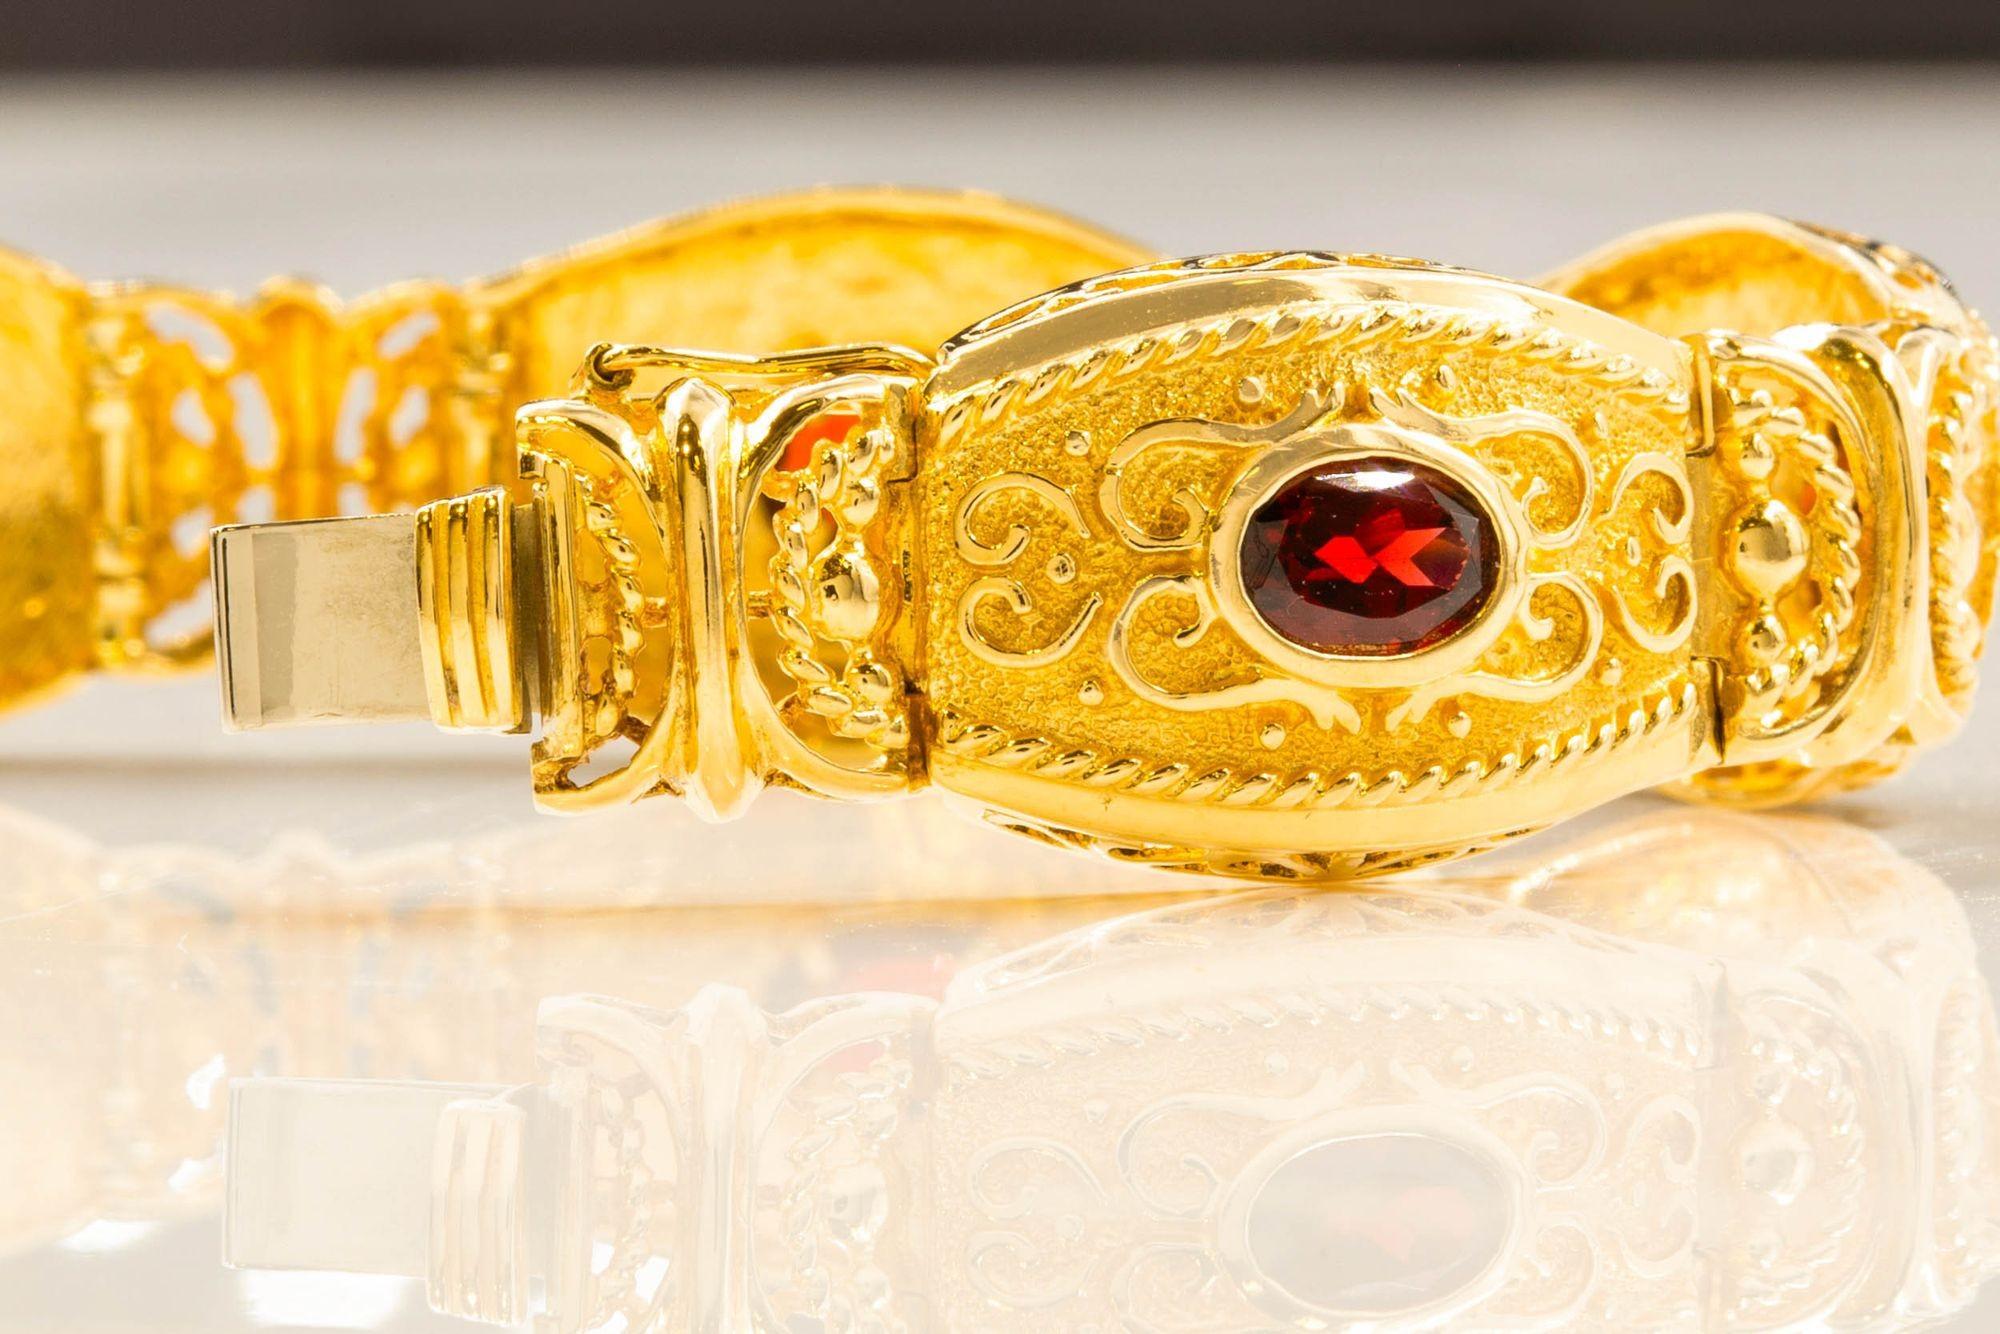 20th Century Vintage Etruscan Revival Style 14k Yellow Gold and Garnet Bracelet For Sale